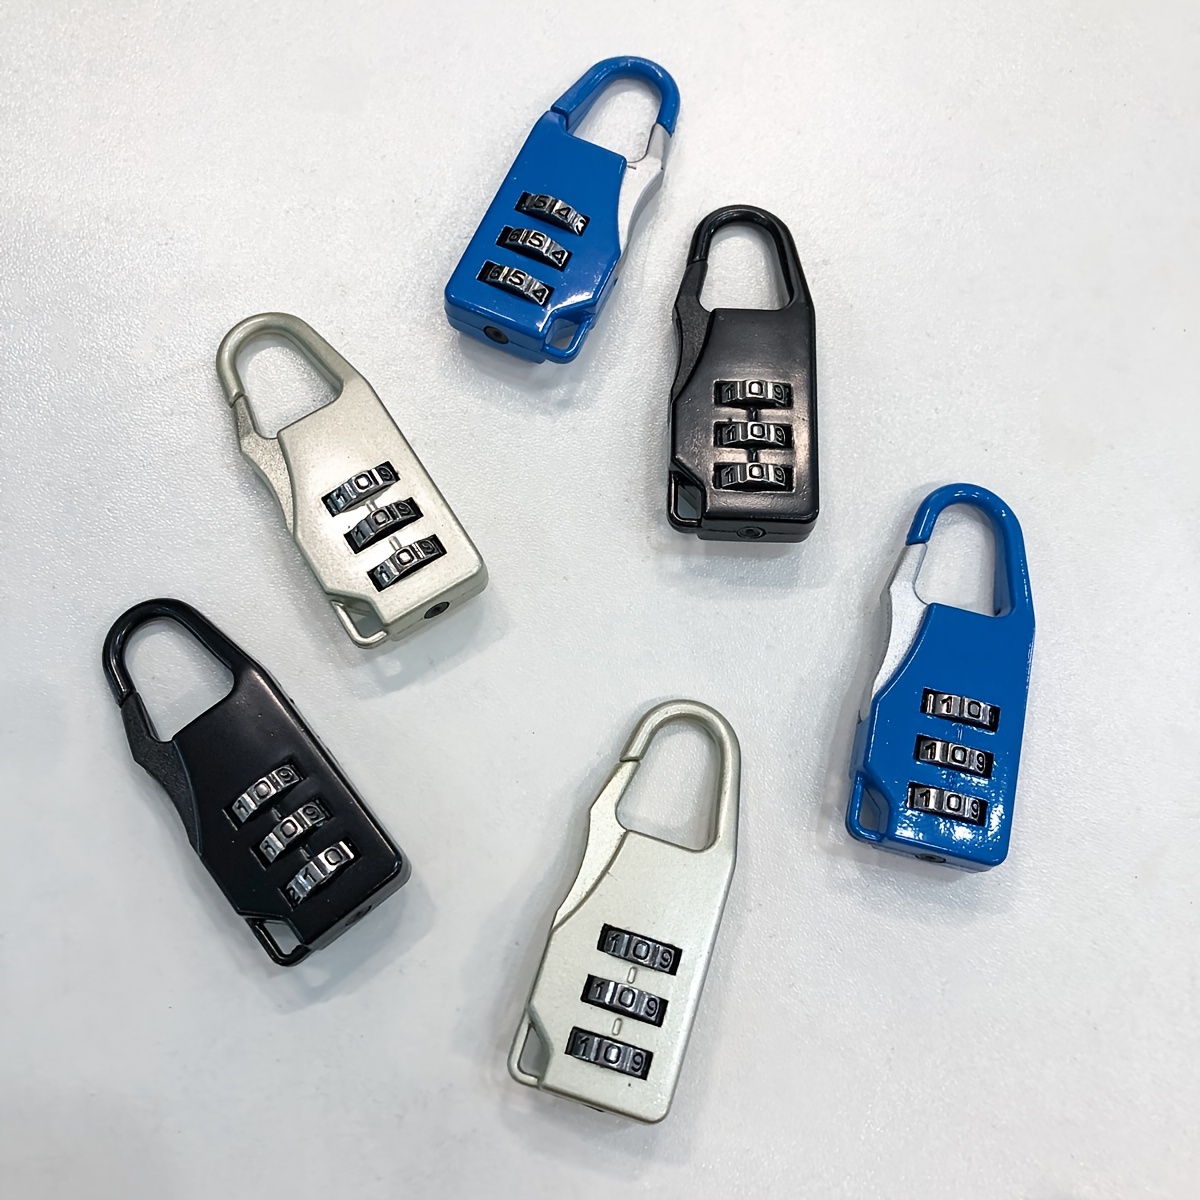 4 Pack Luggage Locks - Combination Padlock With 3-Digit Codes - Alloy Body  For Travel Bag, Suitcase, Lockers, Gym - Black, Blue, Pink, Silver |  Catch.com.au